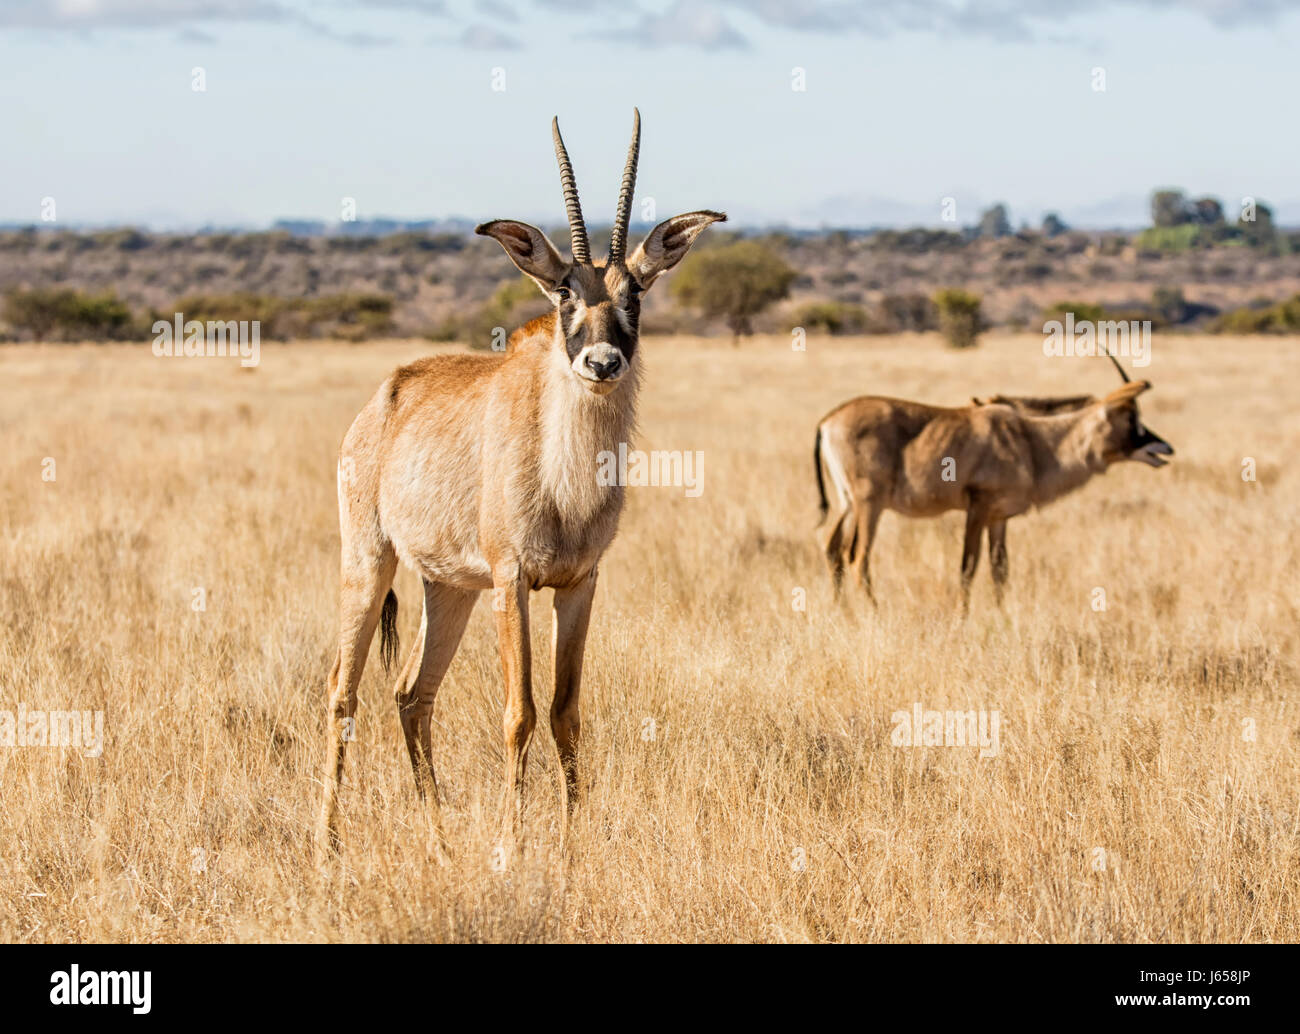 Roan antelope in Southern African savanna Stock Photo